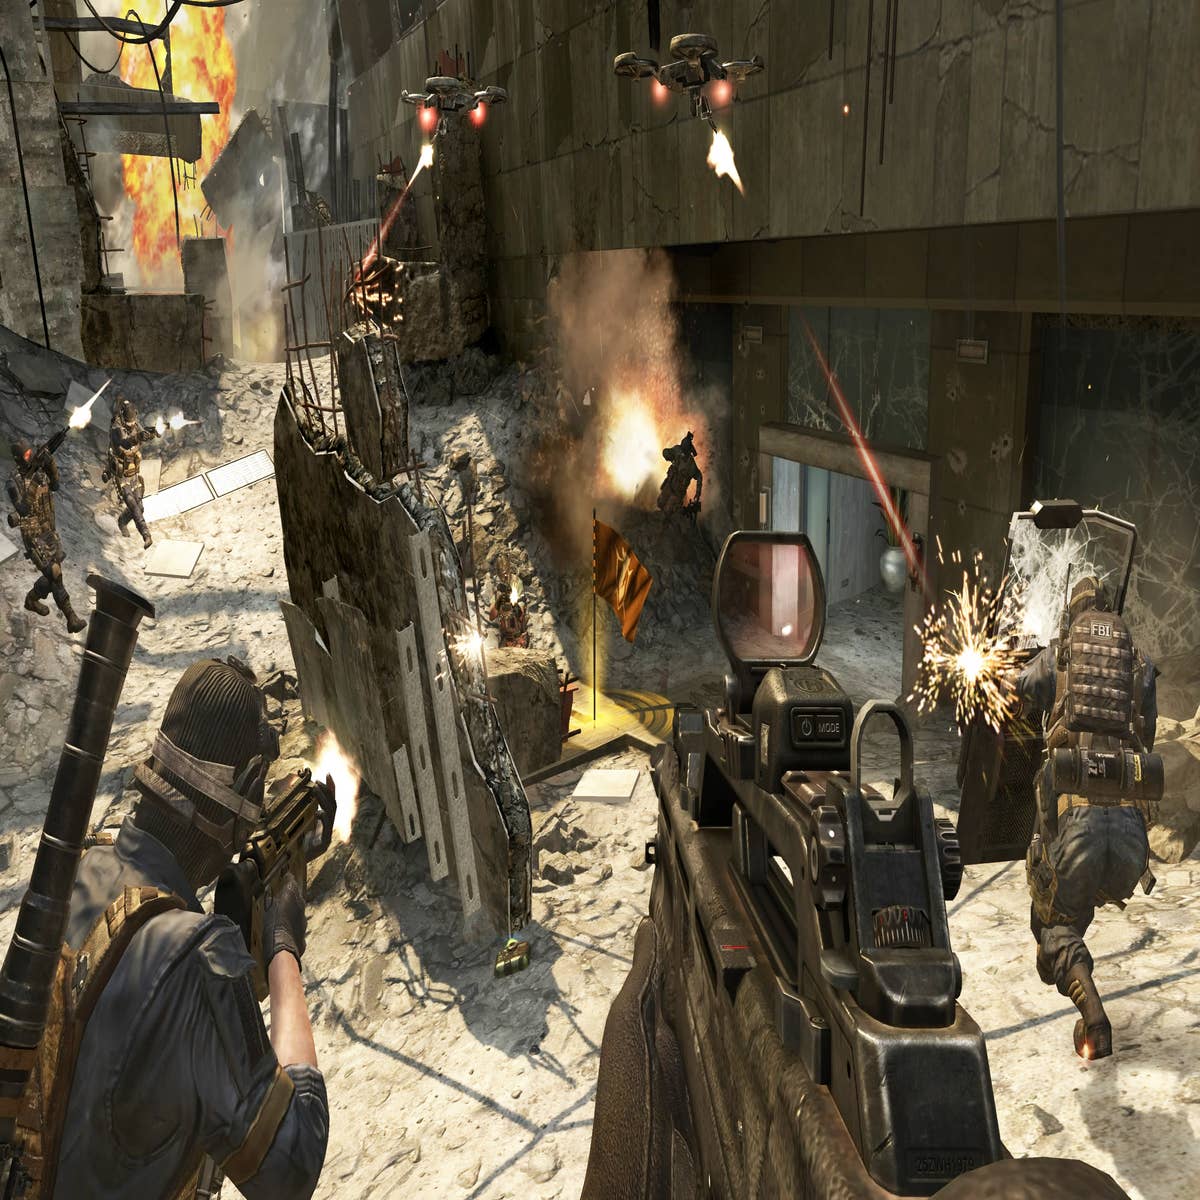 Call of Duty: Mobile' Combines Best Parts of 'Black Ops,' 'Modern